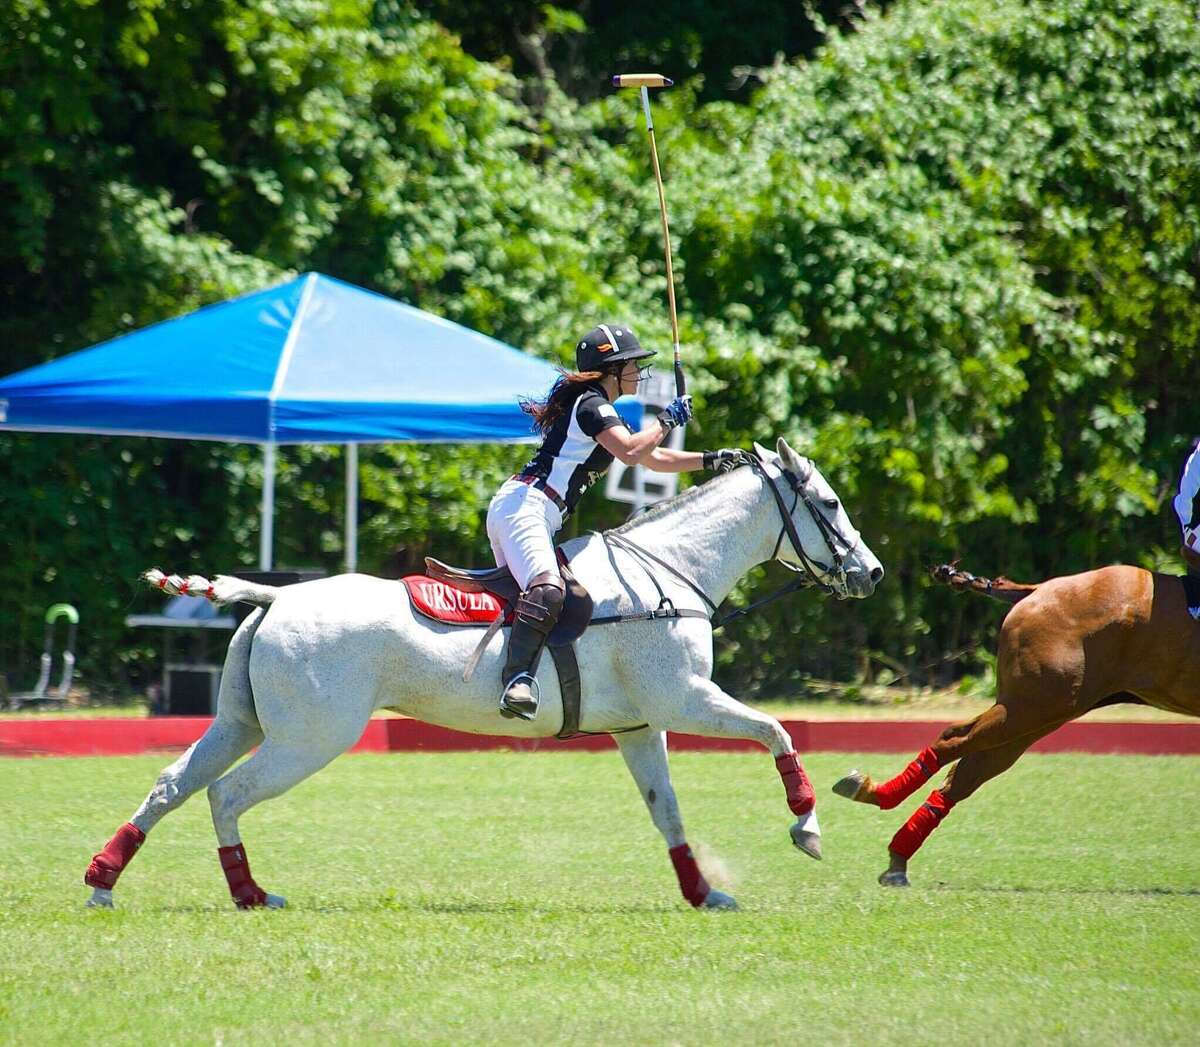 Ursula Pari doing what gives her the biggest adrenaline rush — playing polo.